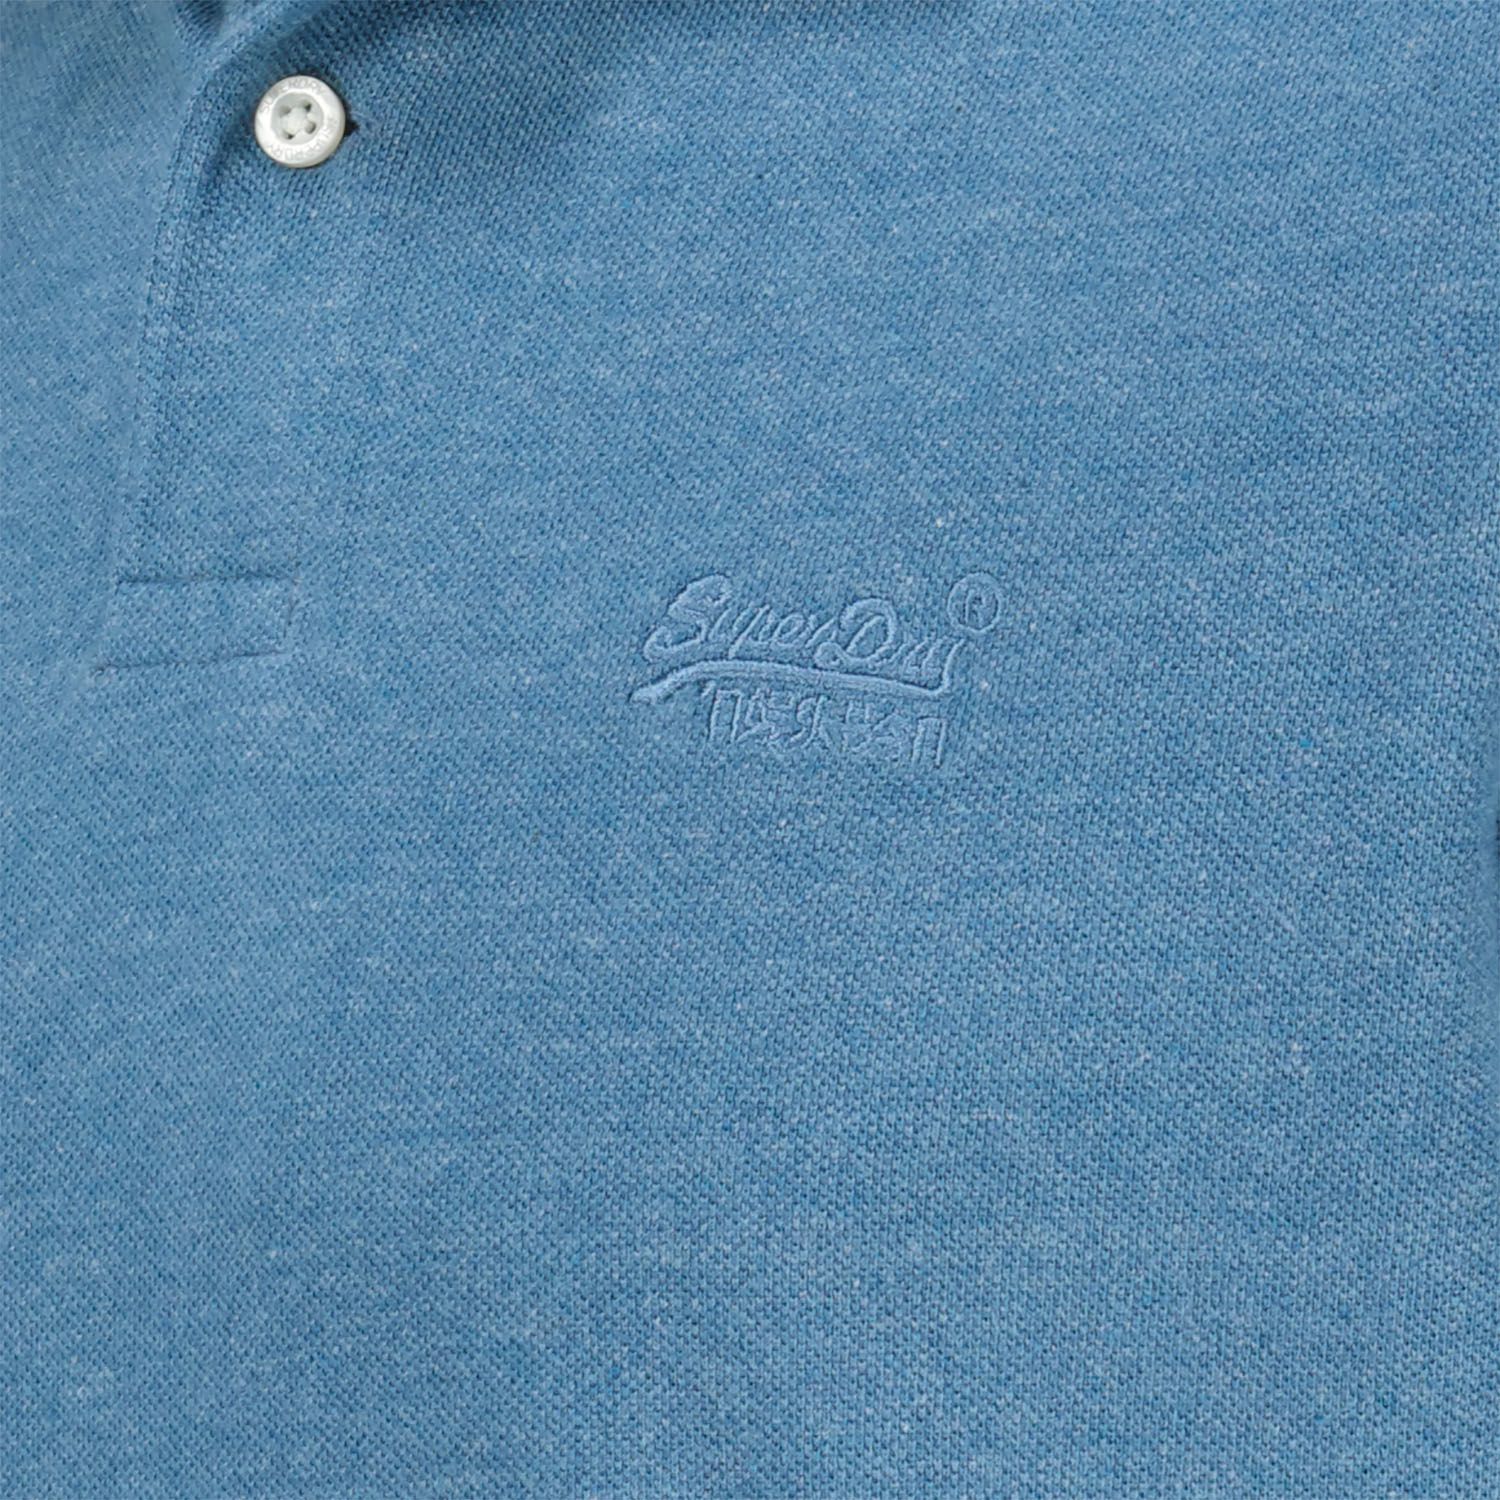 Superdry Polo Blauw